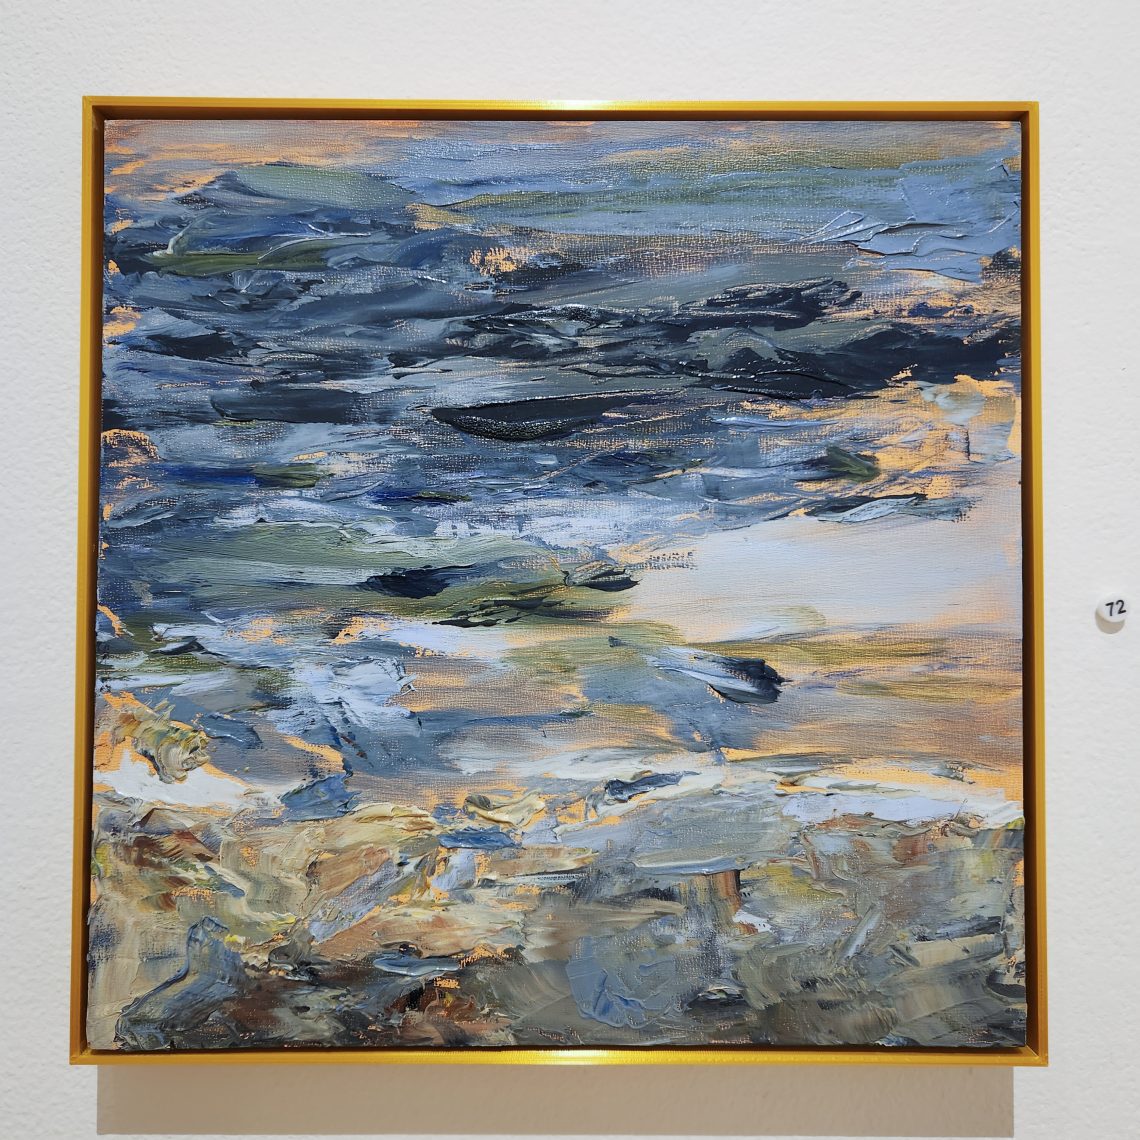 Kristin Golden "Willard Beach, May"
2022. Oil paint, 13 ¾ in x 13 ¾ in. Part of the "2023 Bachelor of Fine Arts and Bachelor of Arts Exhibition," University of Southern Maine Art Gallery.